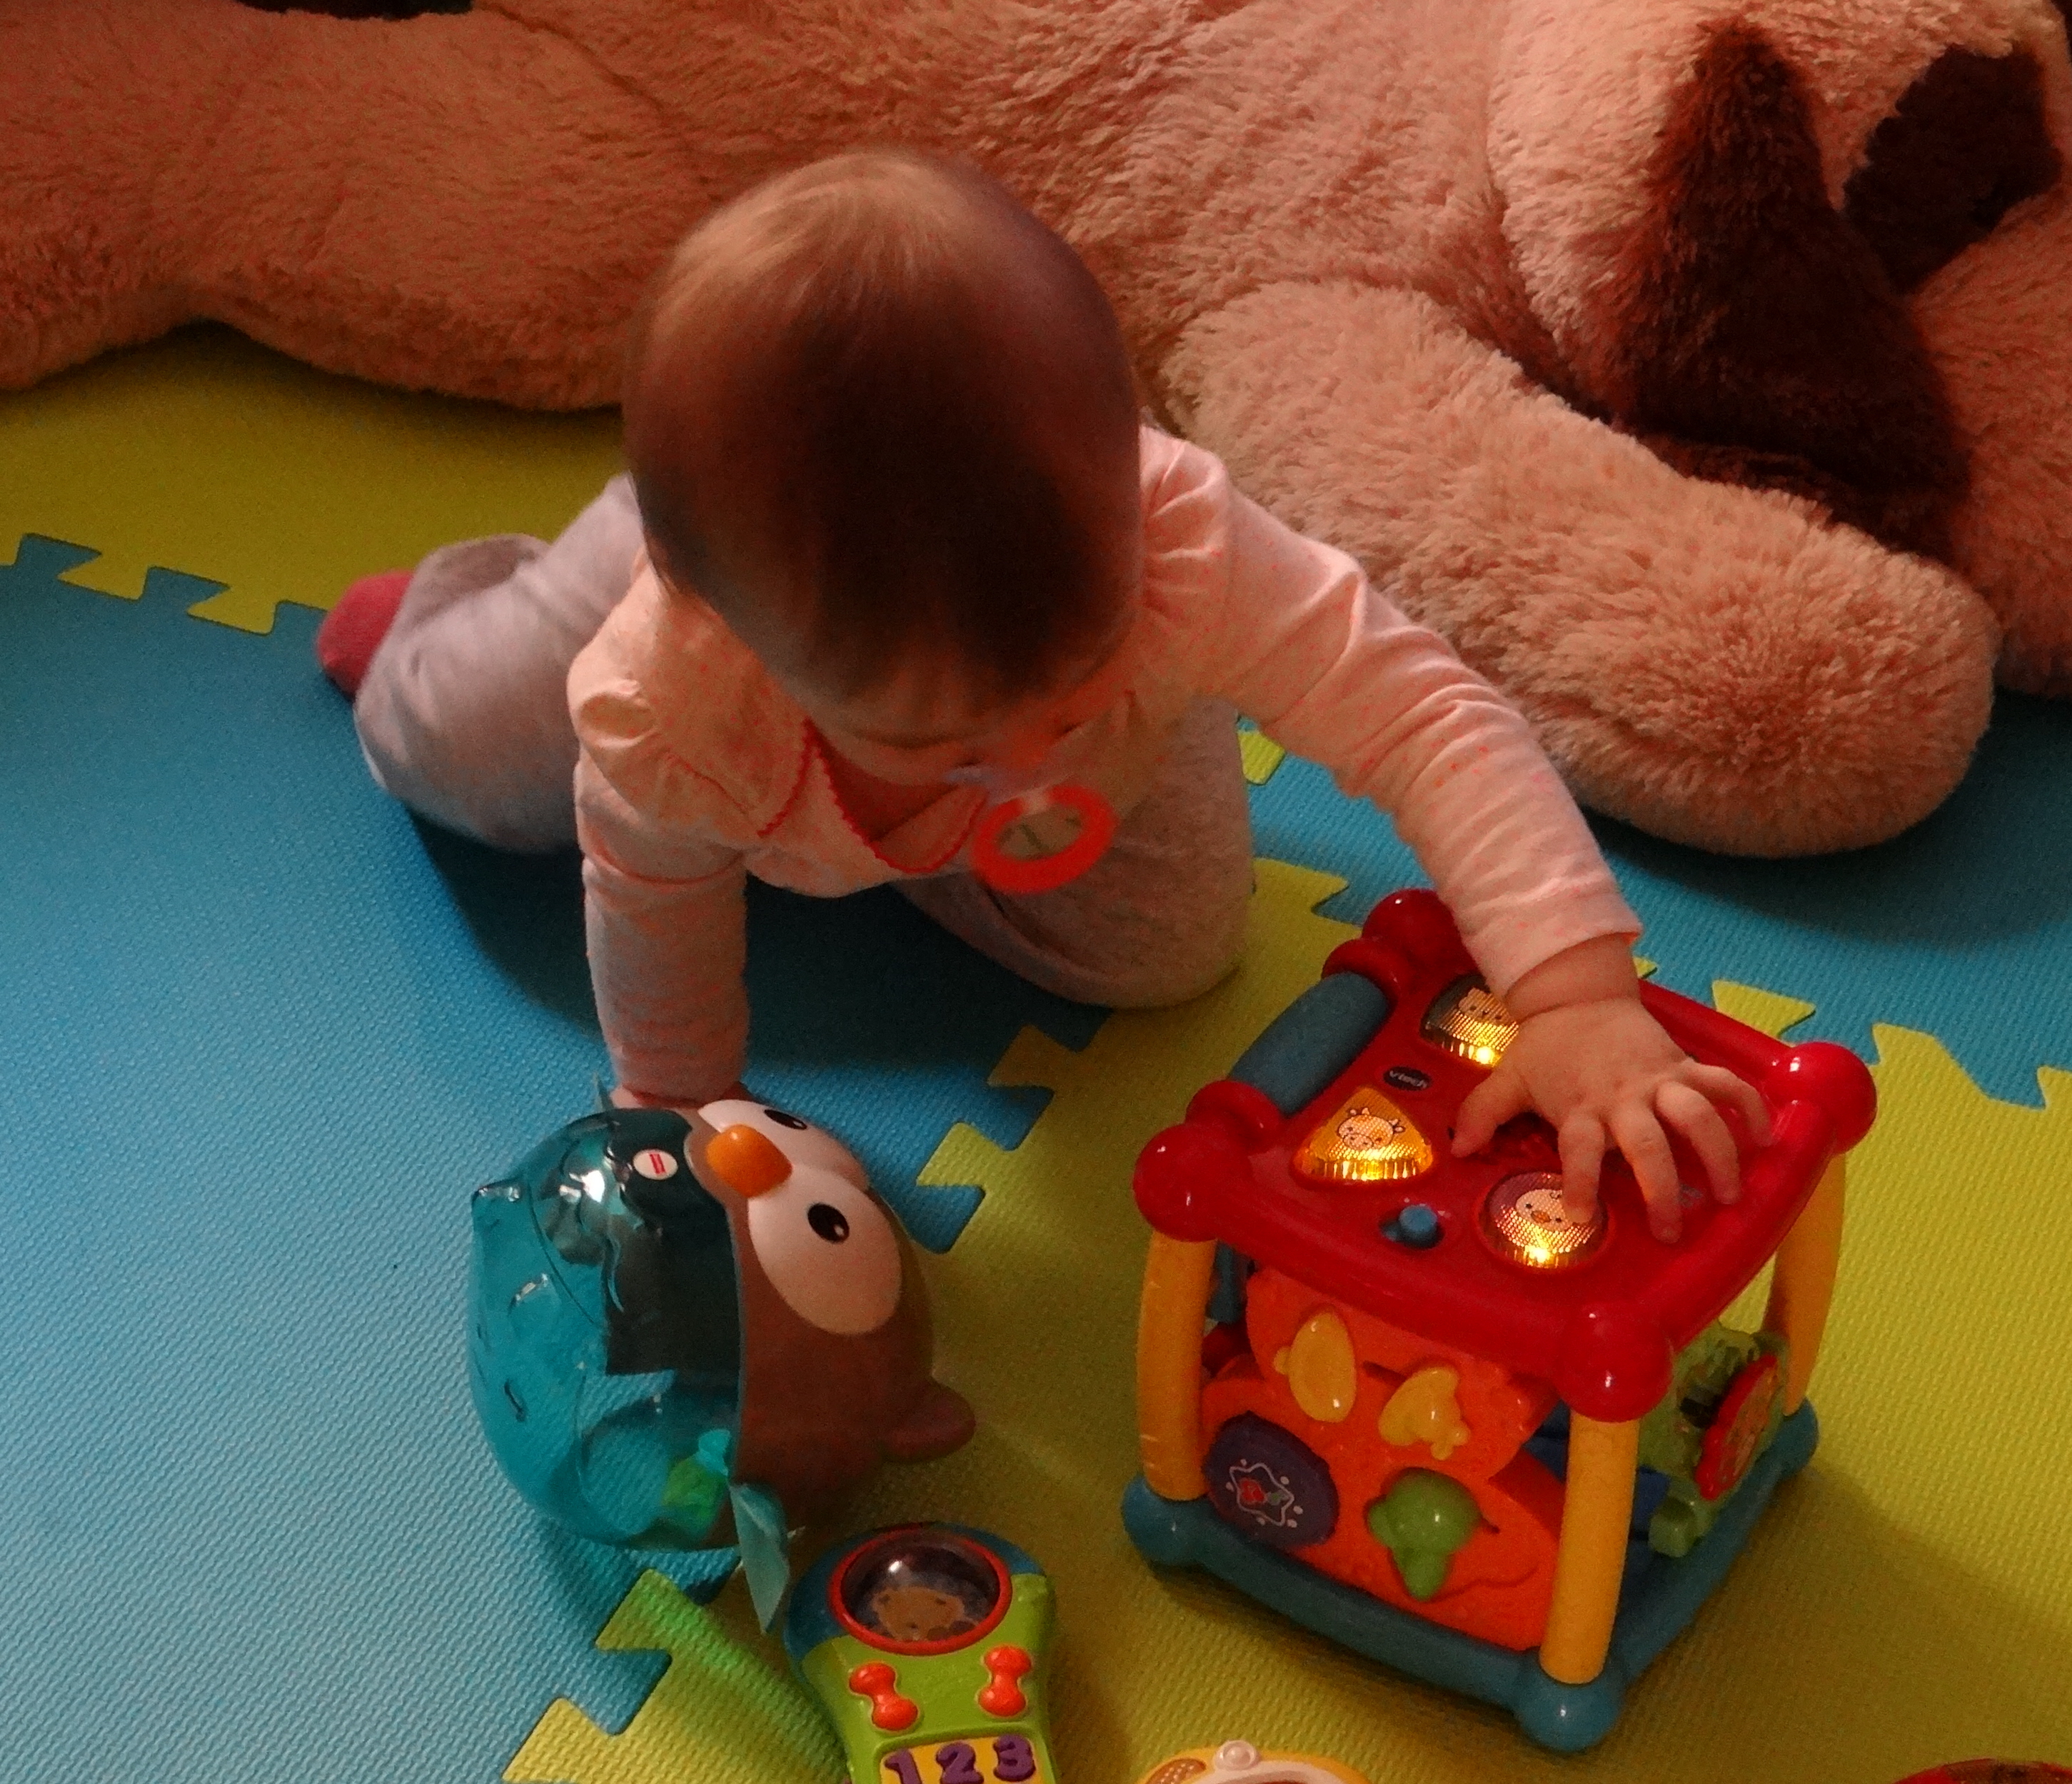 Baby playing with a Vtech toy.